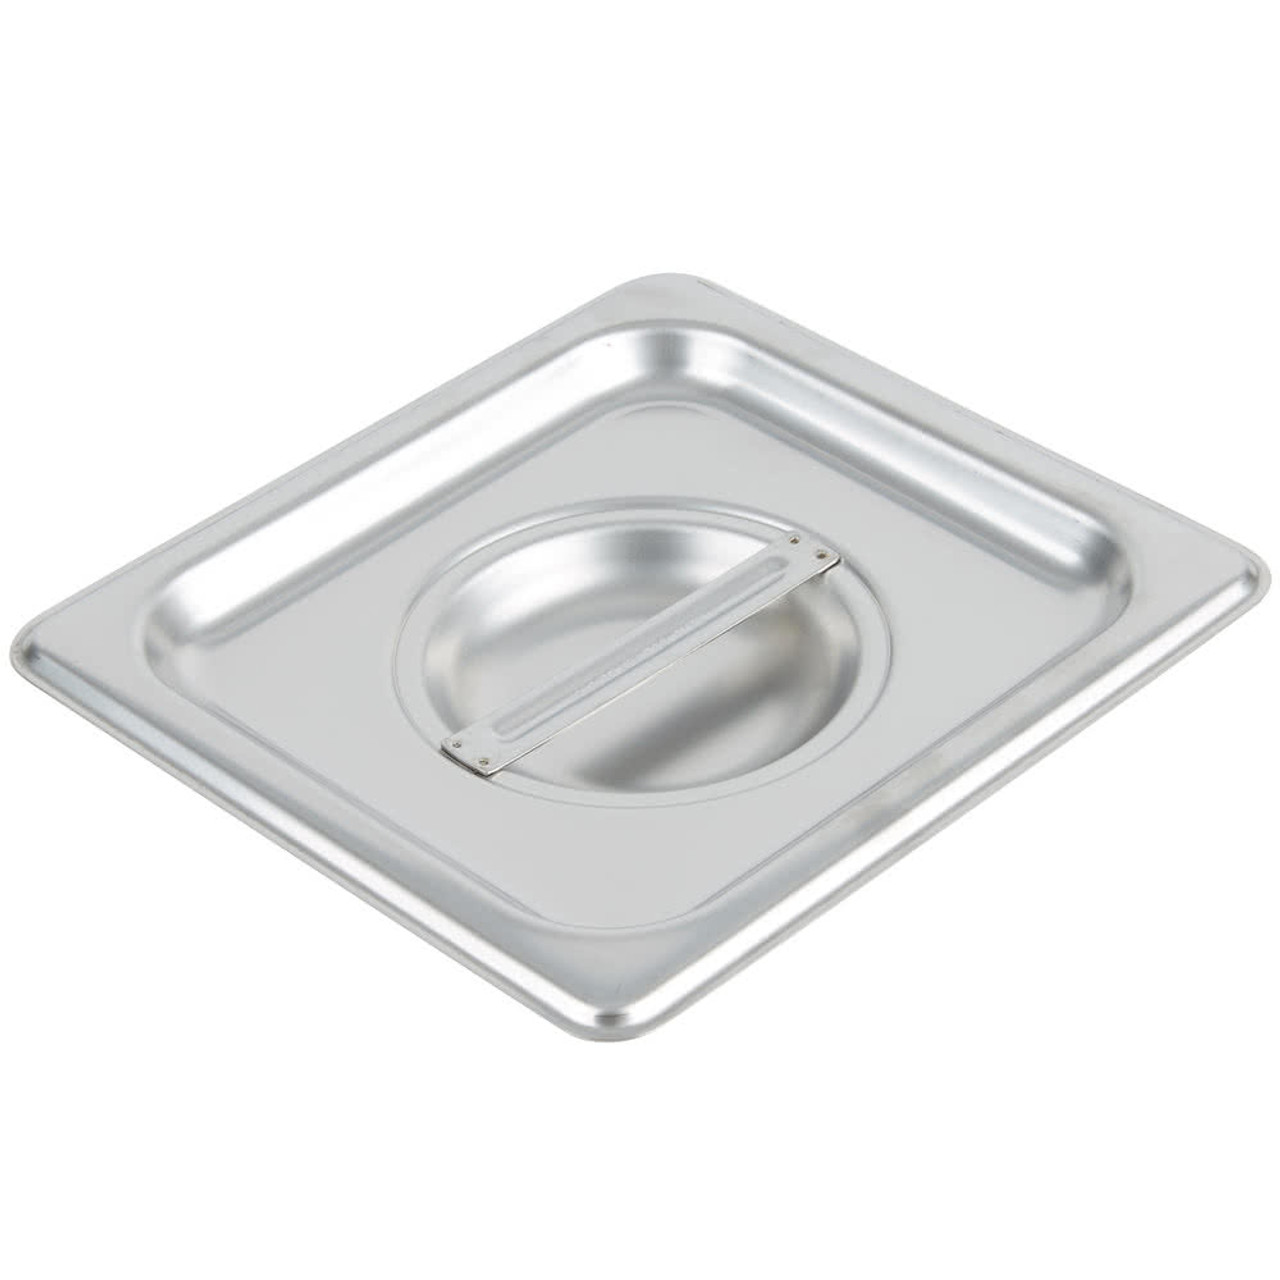 Stainless Steel Solid Steam Table / Hotel Pan Cover-1/6 Size 